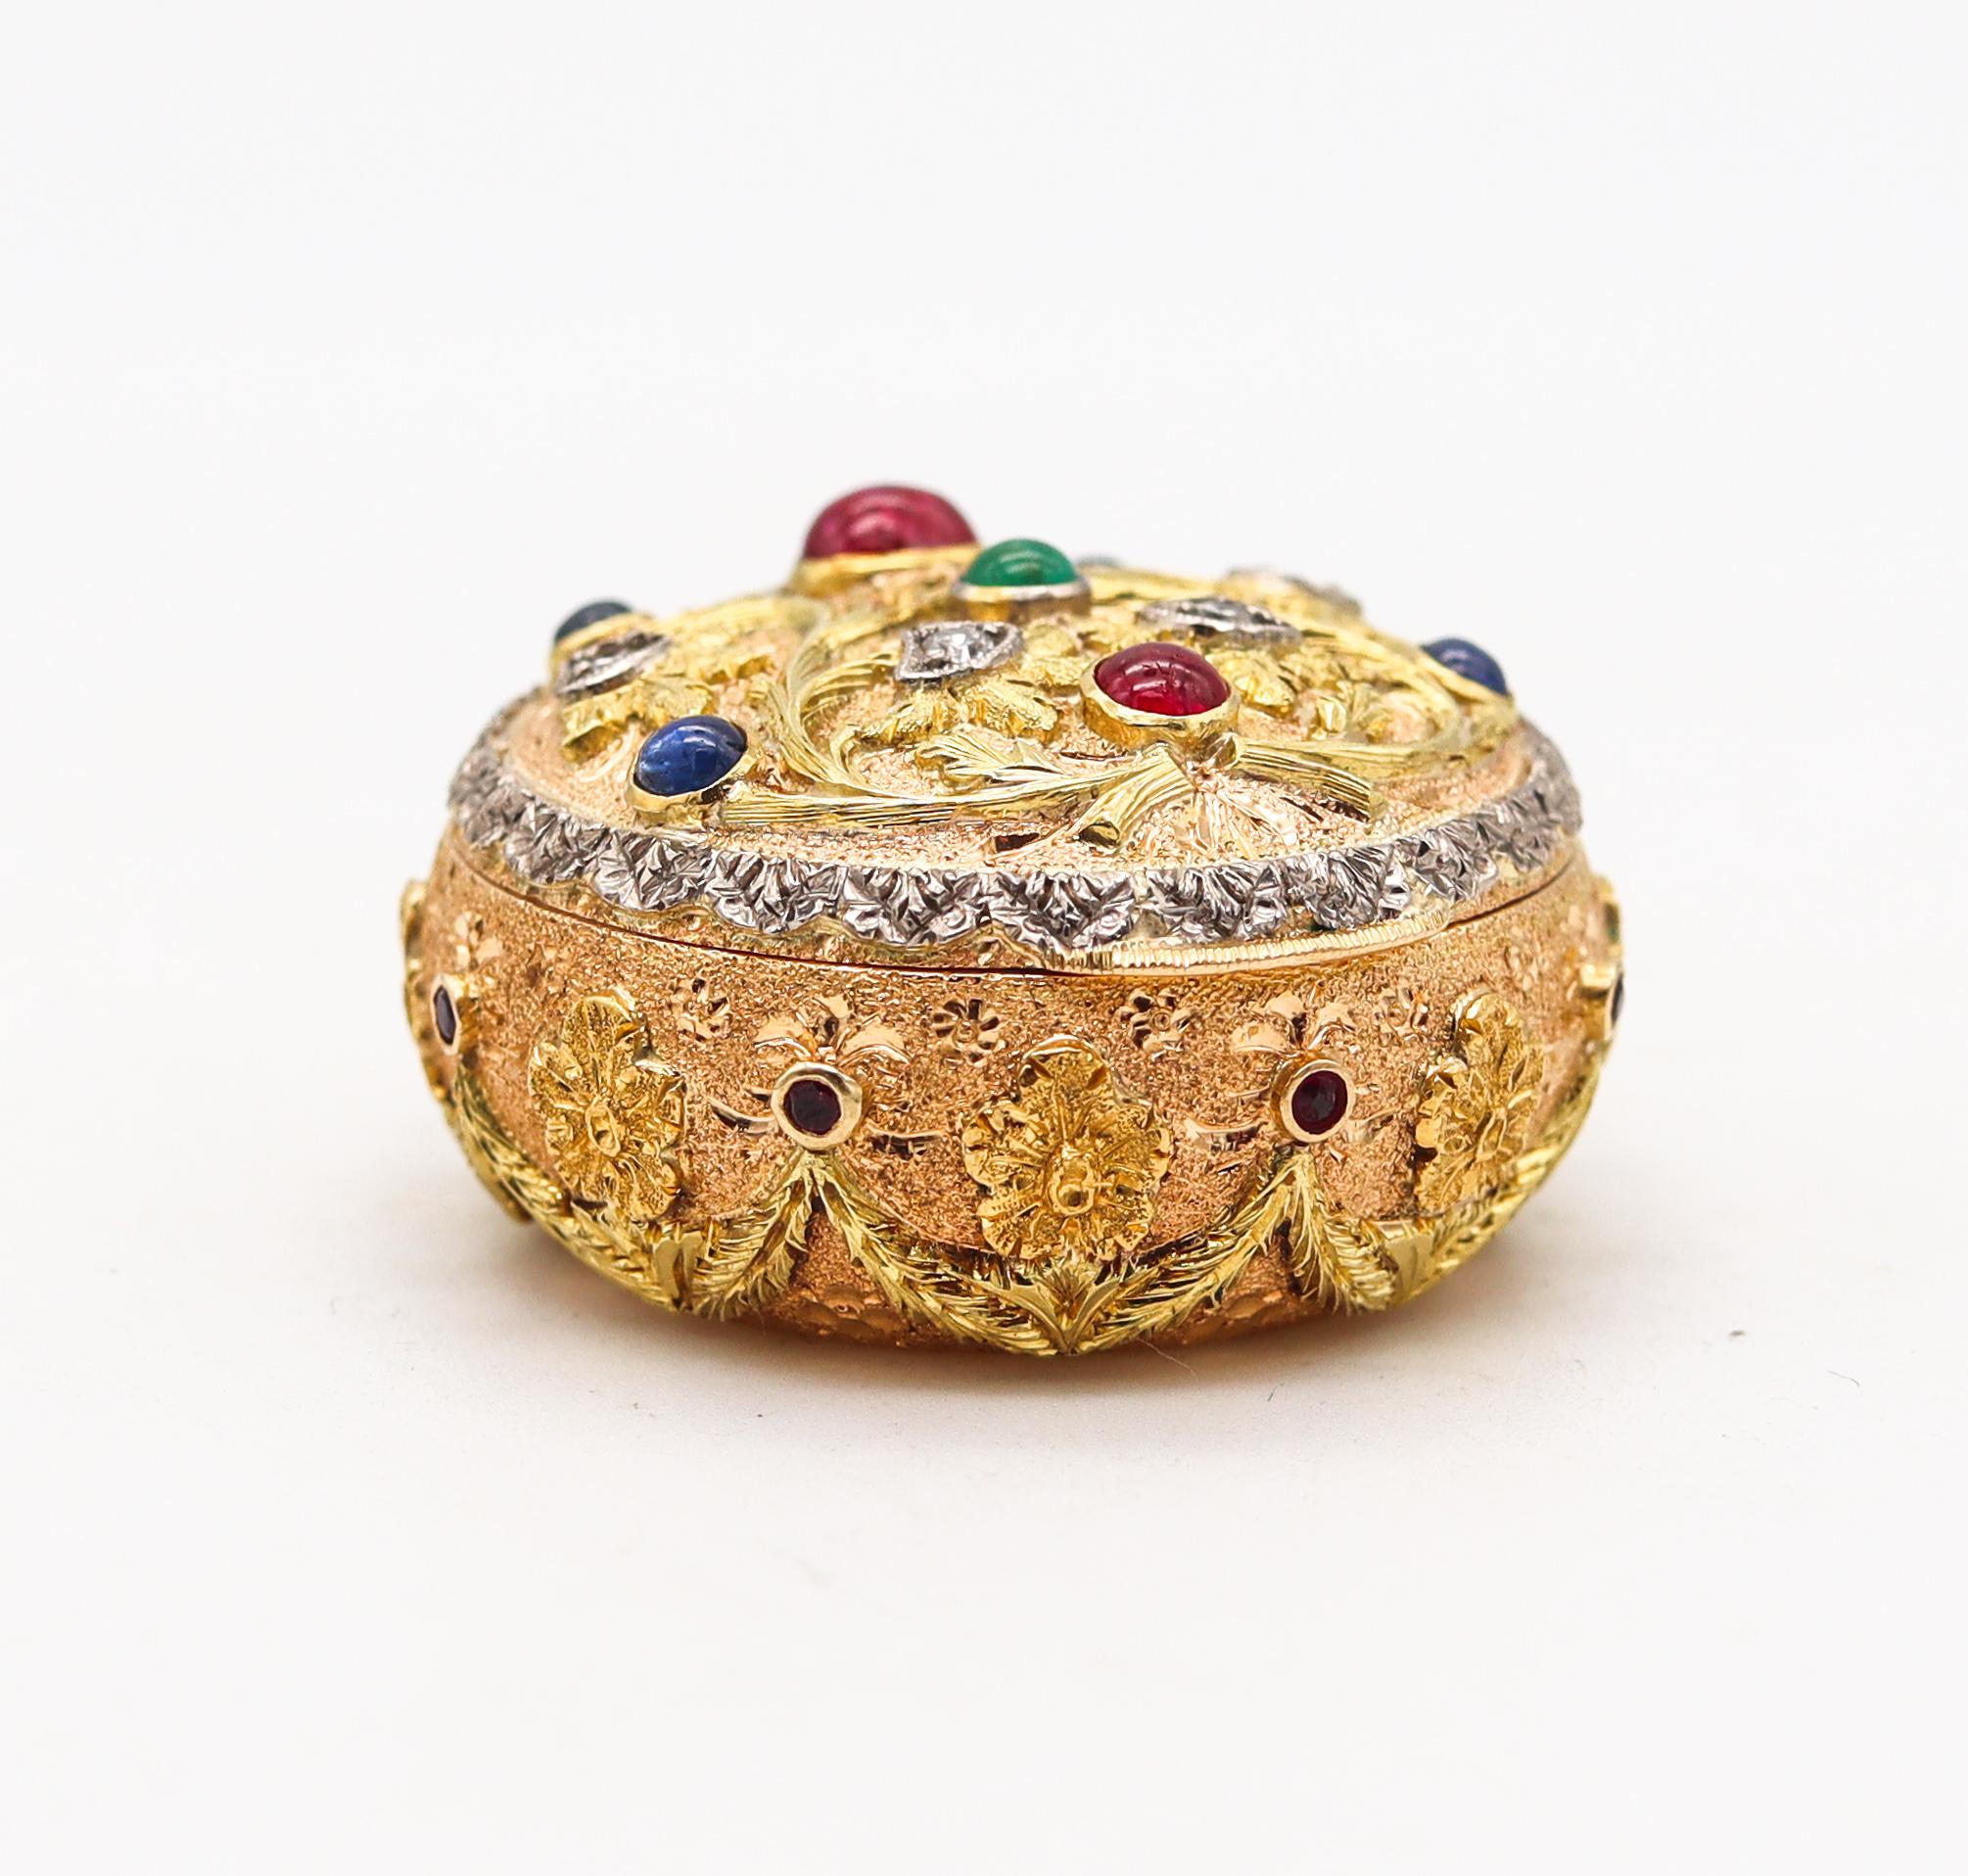 Beautiful gem set pill box designed by Cazzaniga.

Gorgeous luxurious and colorful piece, created in Roma Italy by the house of Cazzaniga, back in the 1950's. This stunning round bombe pill box has been crafted in the high rococo style with